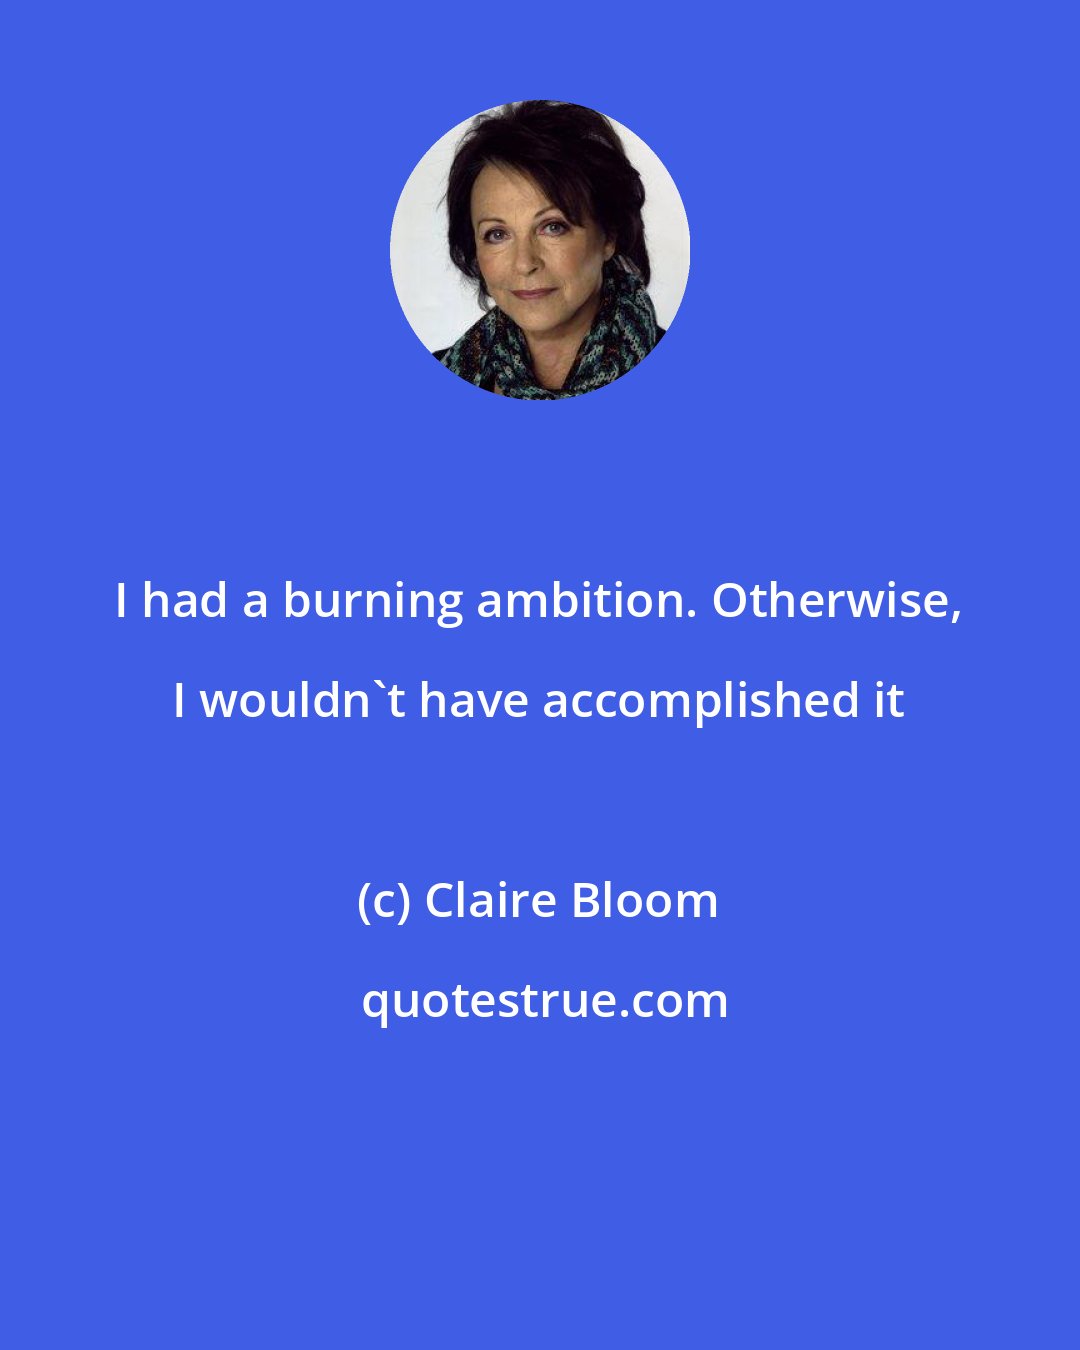 Claire Bloom: I had a burning ambition. Otherwise, I wouldn't have accomplished it